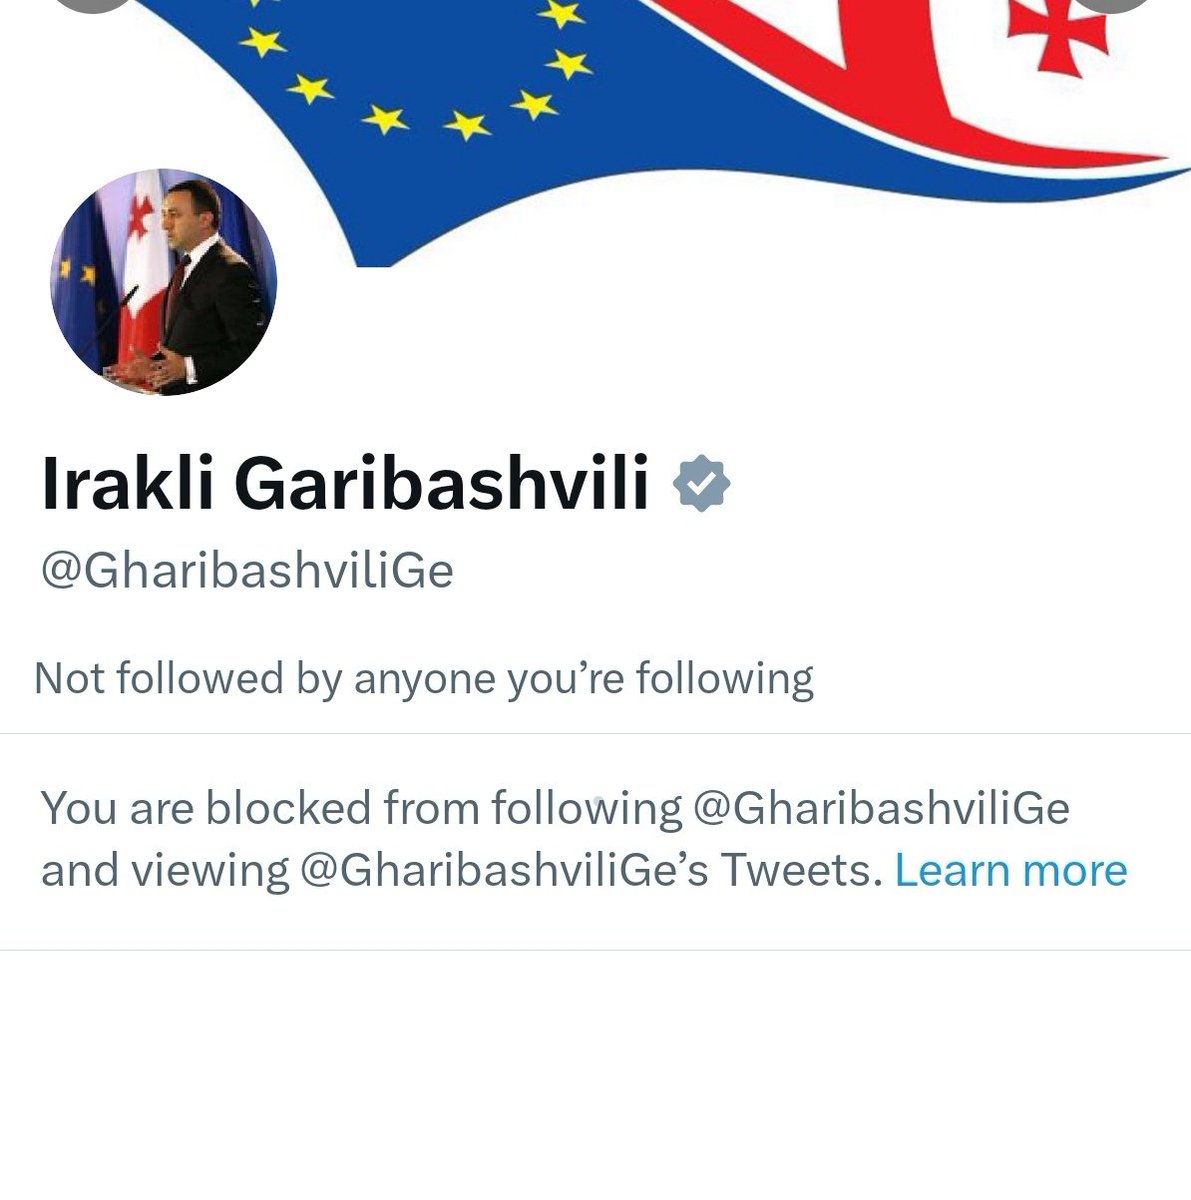 PM of Georgia 🇬🇪 @GharibashviliGe has blocked me 🕵️‍♀️ How interesting ... Couple of days ago I called him out, publicly and demanded taking proper steps to serve interests of Georgians.  Seems he does not care much & does not allow critical or logical thinking.